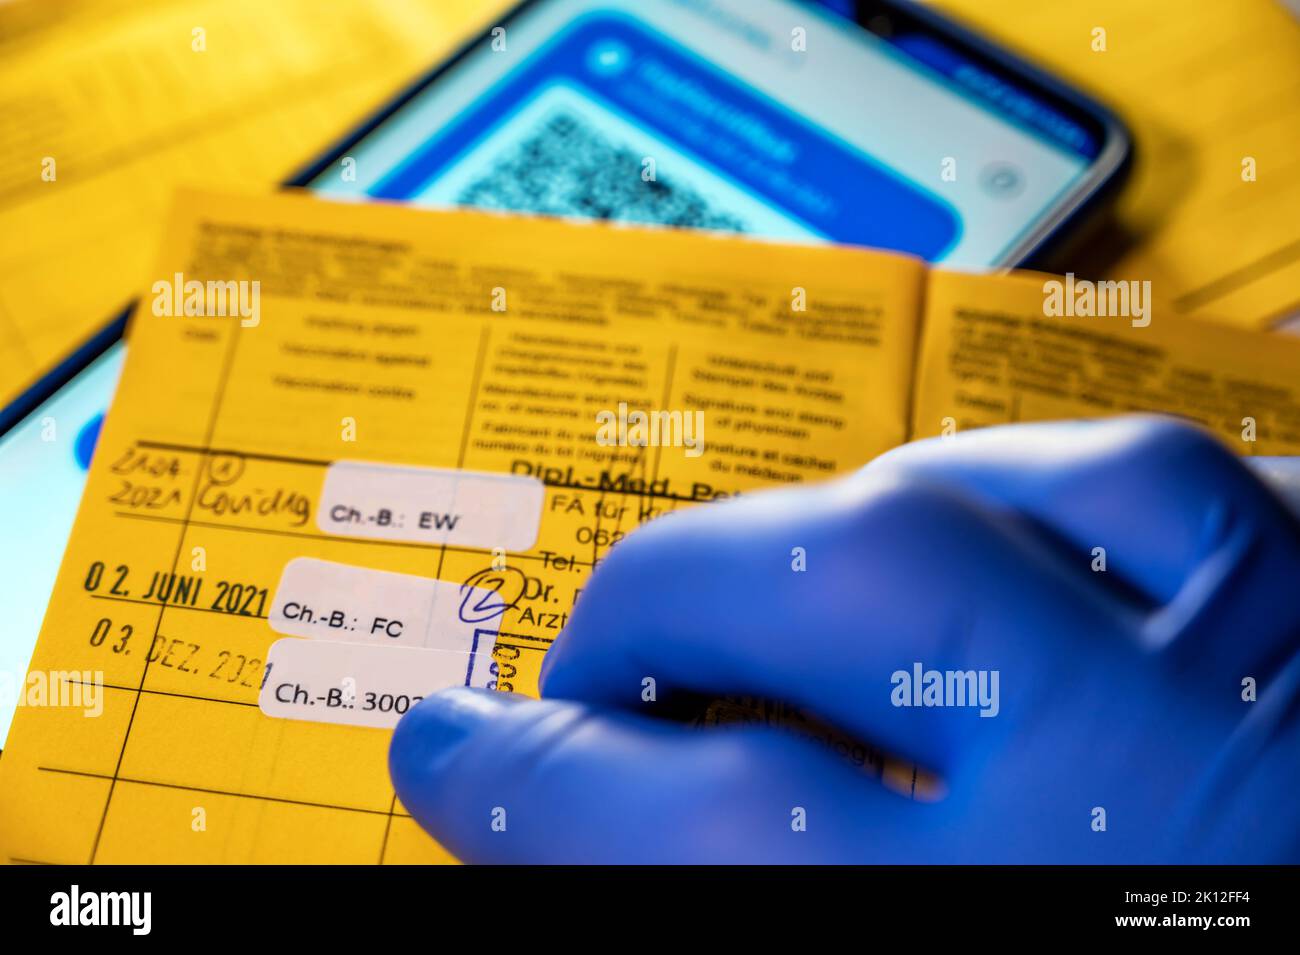 Yellow vaccination card and digital vaccination card on a smartphone Stock Photo